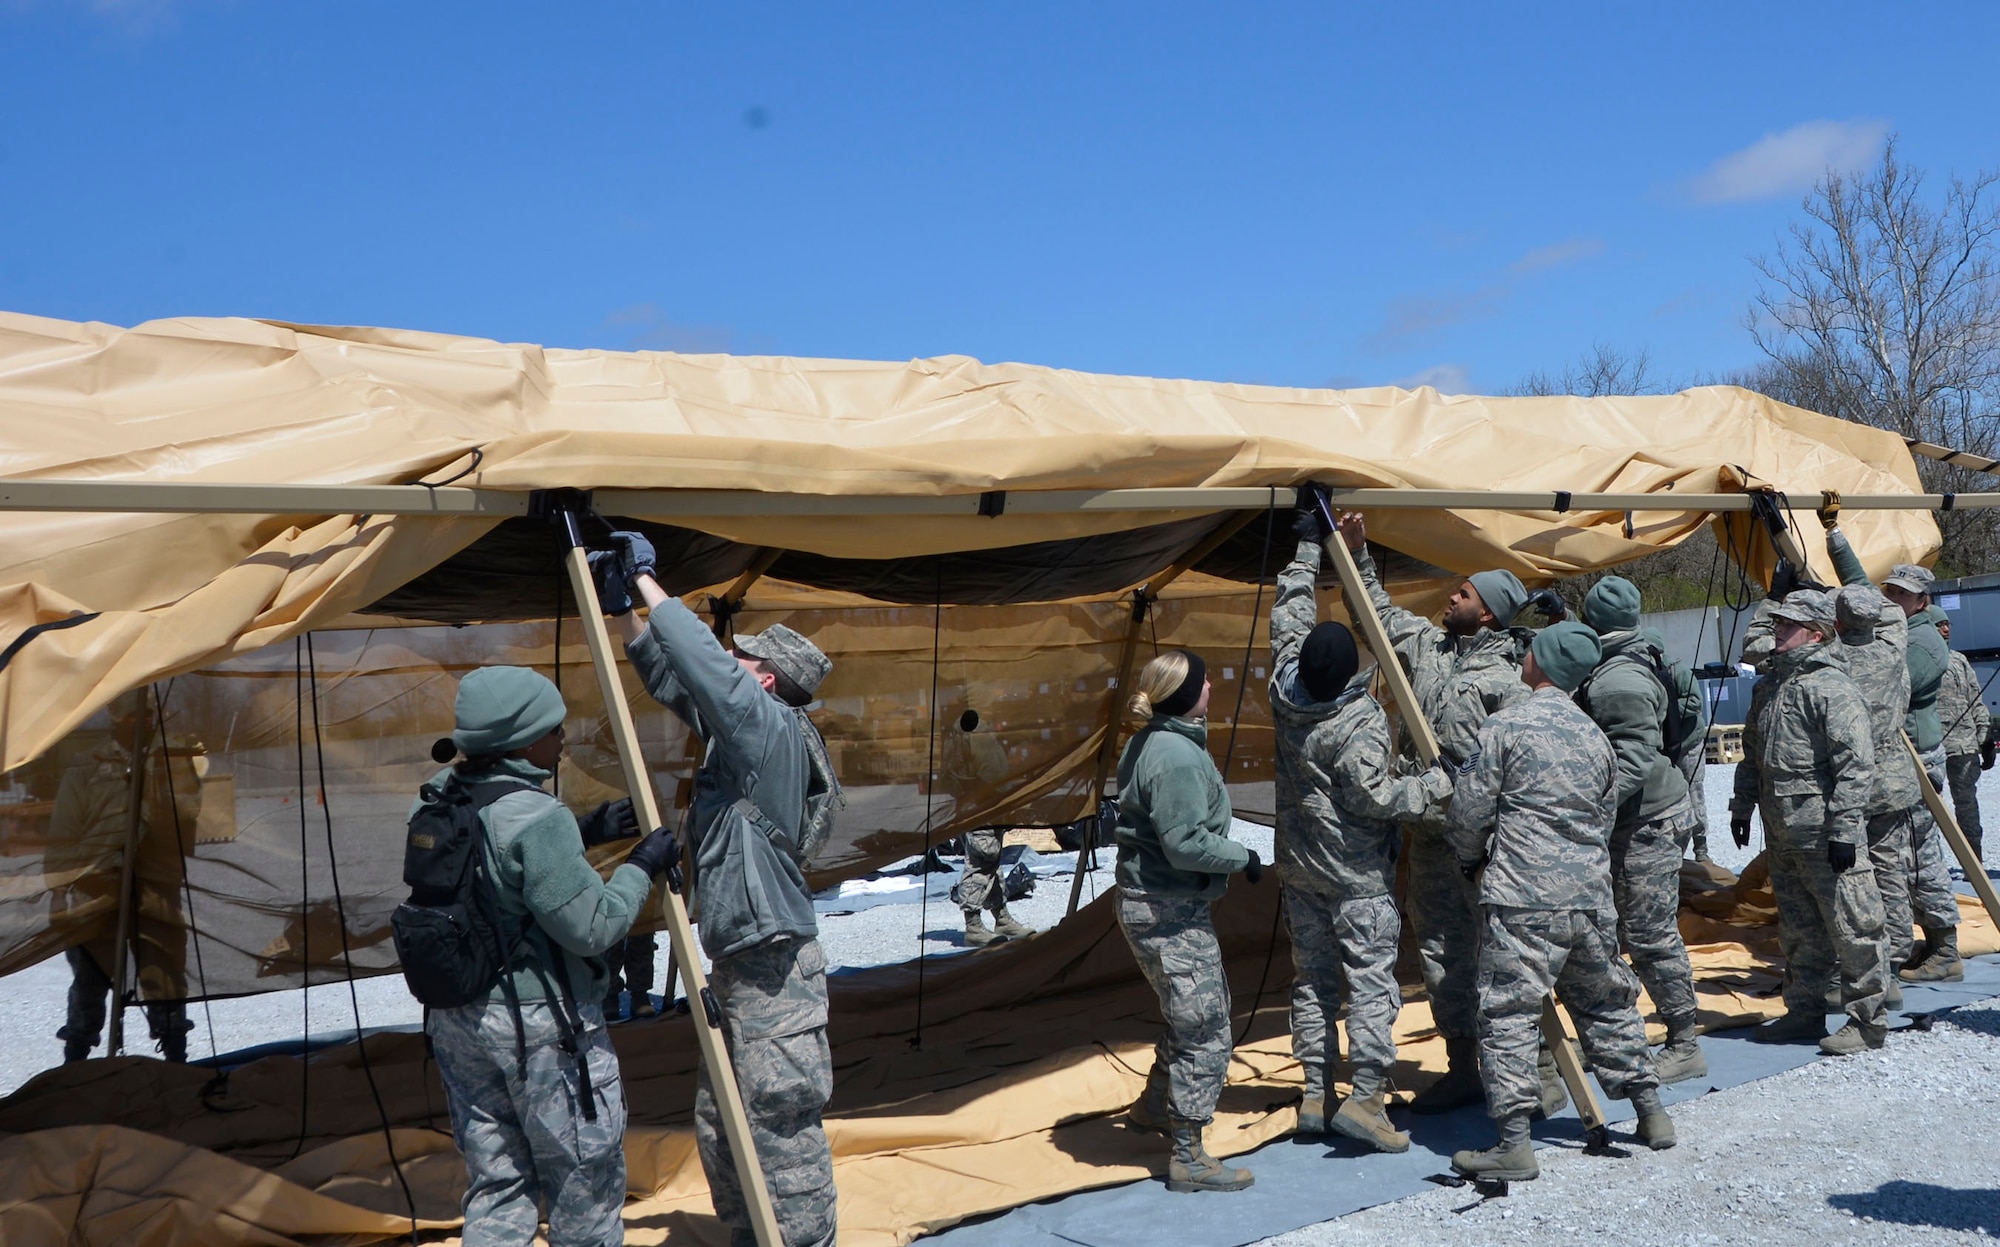 Members of the 81st Medical Group put up a tent side during the Expeditionary Medical Support field confirmation exercise at Camp Atterbury, Indiana, April 17, 2018. The confirmation exercise evaluated the tactics, techniques and procedures of EMEDS operations during a domestic U.S. contingency such as a natural disaster. (U.S. Air Force photo by Mary McHale)